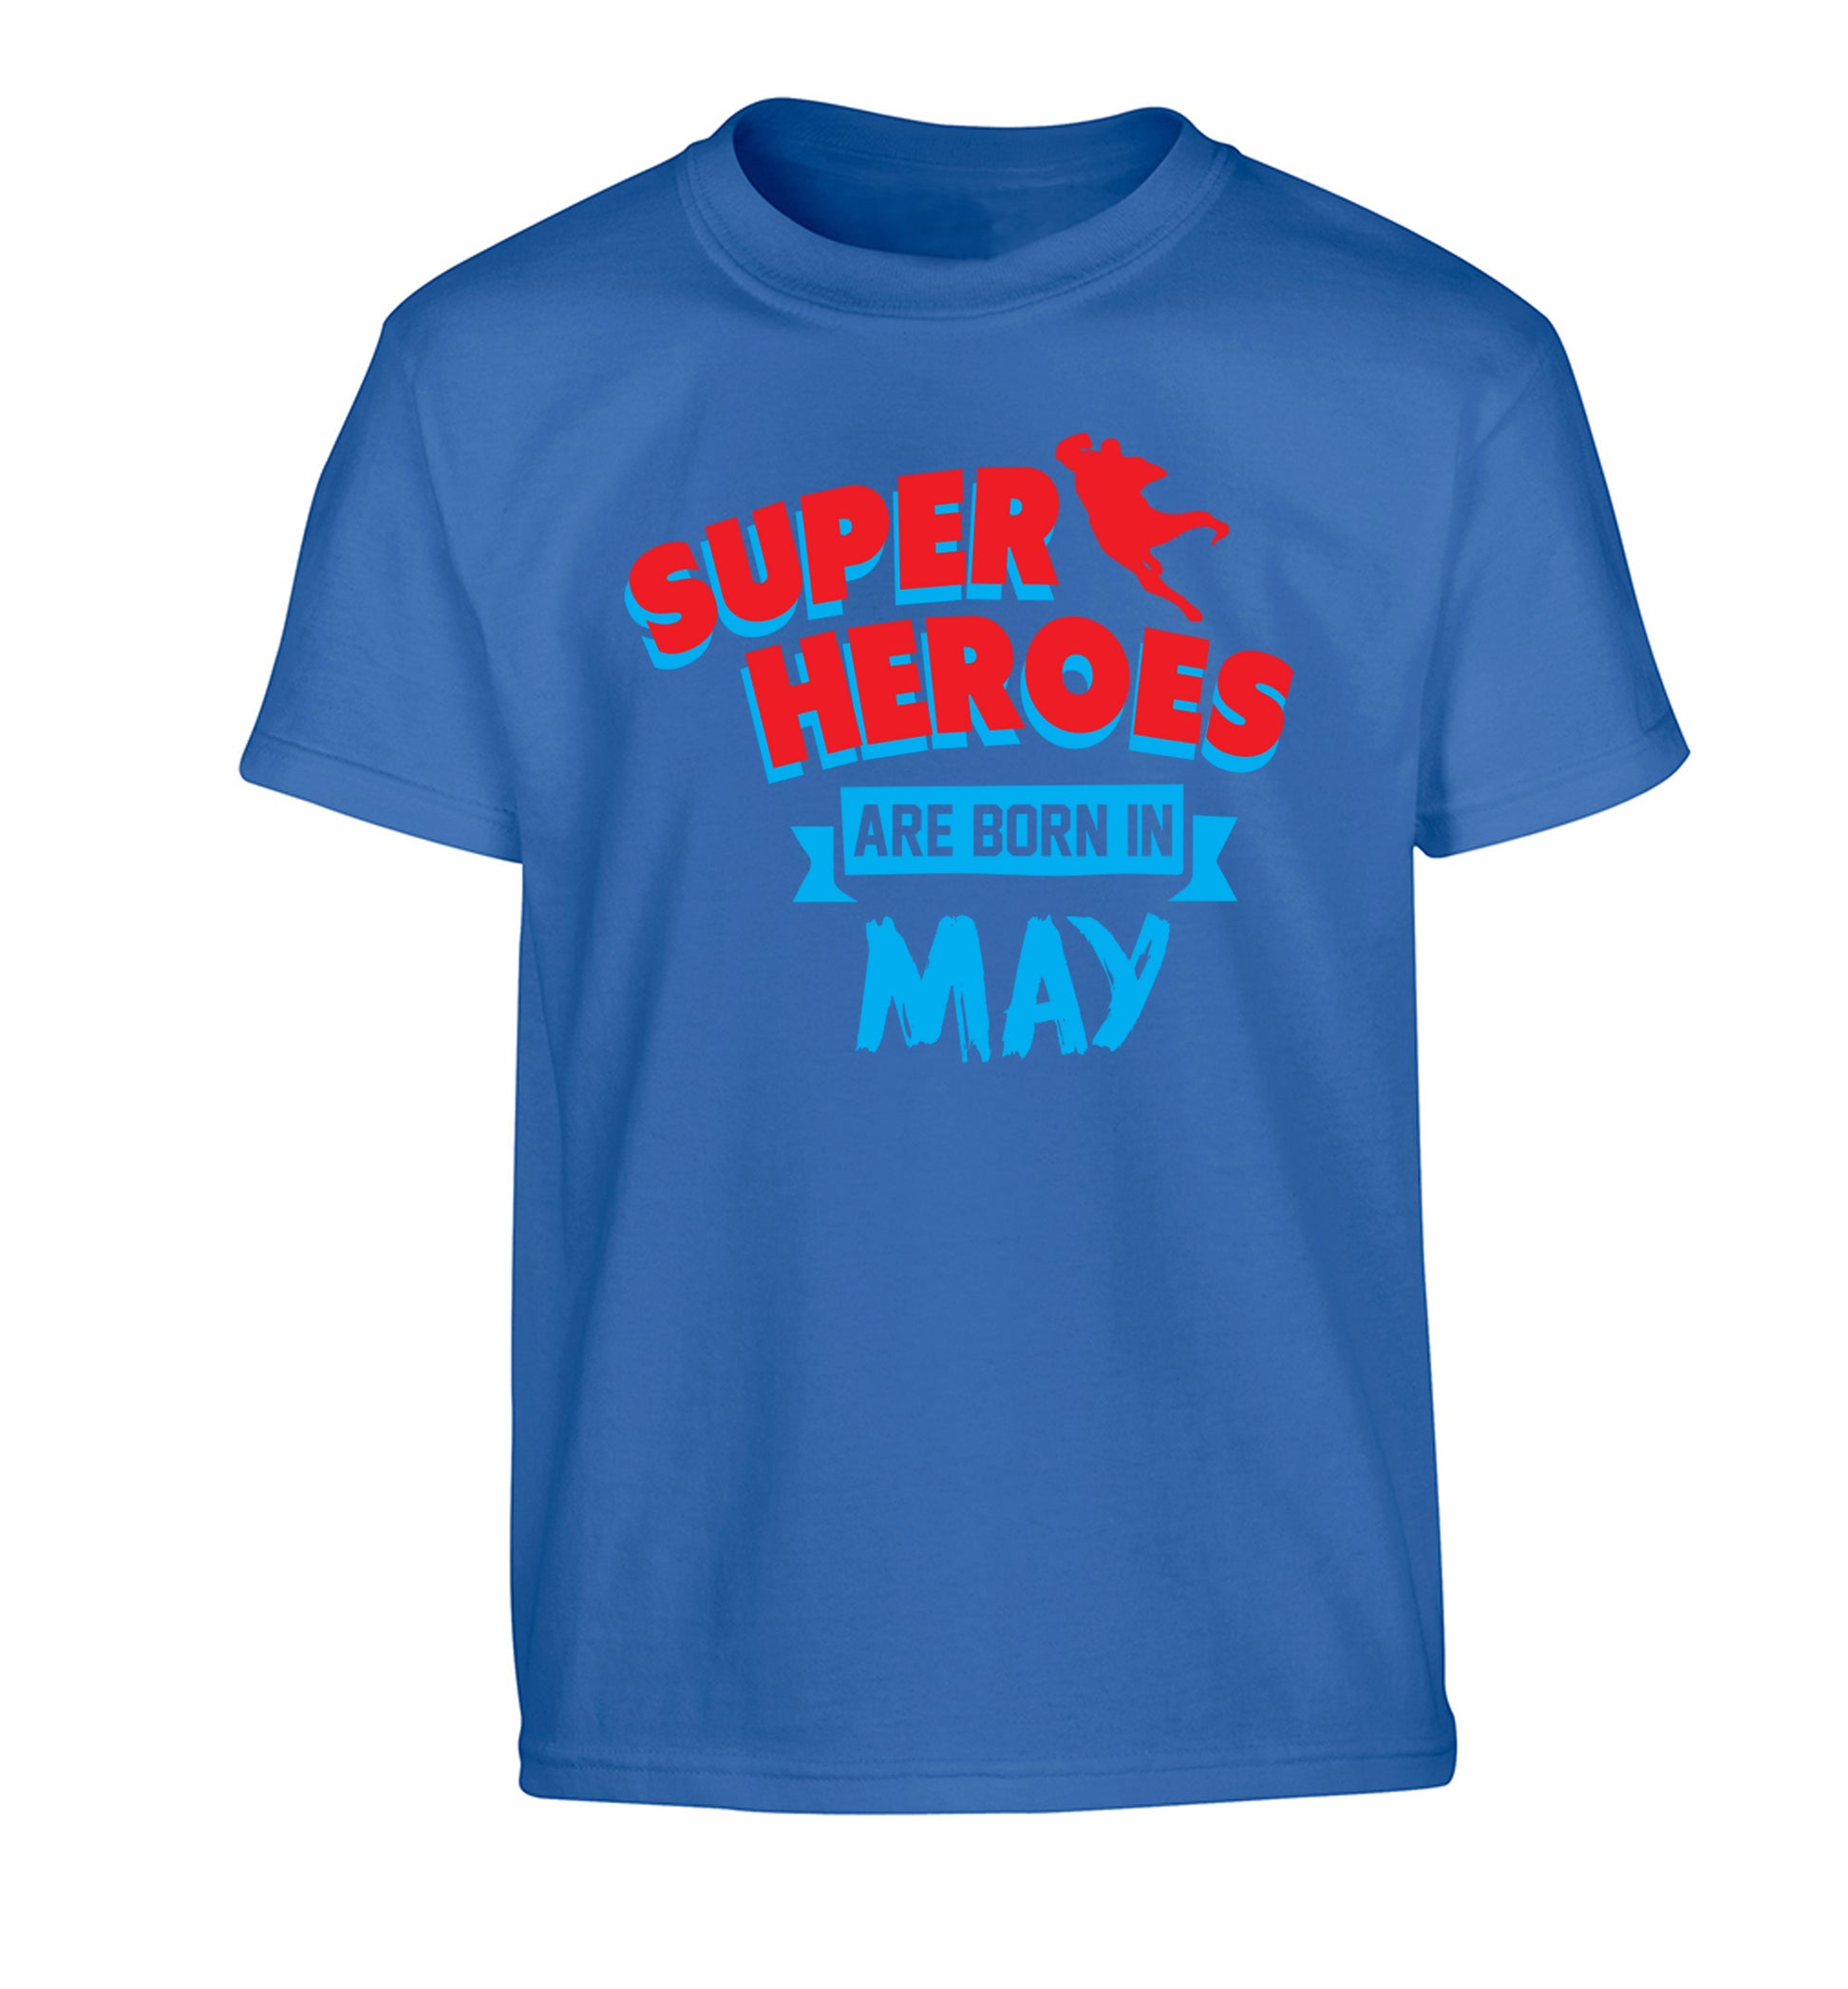 Superheros are born in May Children's blue Tshirt 12-13 Years